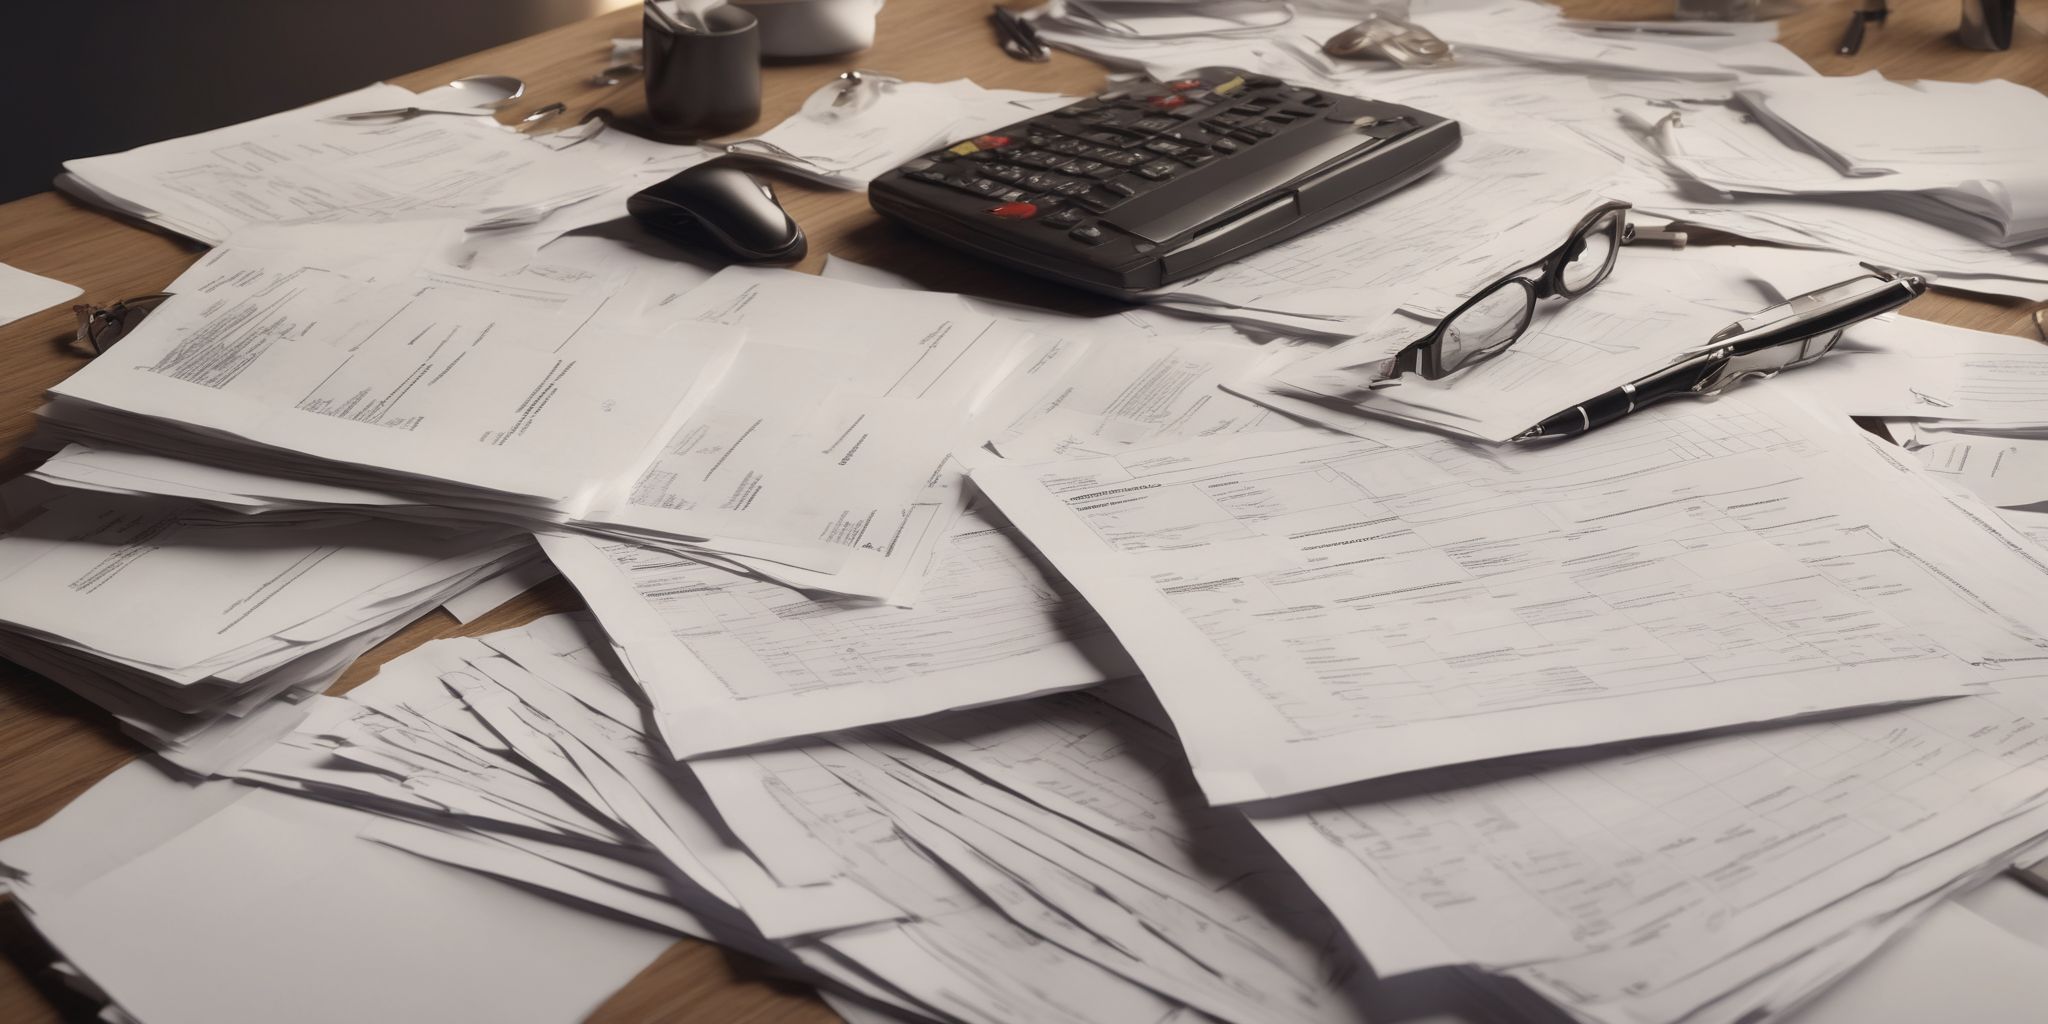 Paperwork  in realistic, photographic style